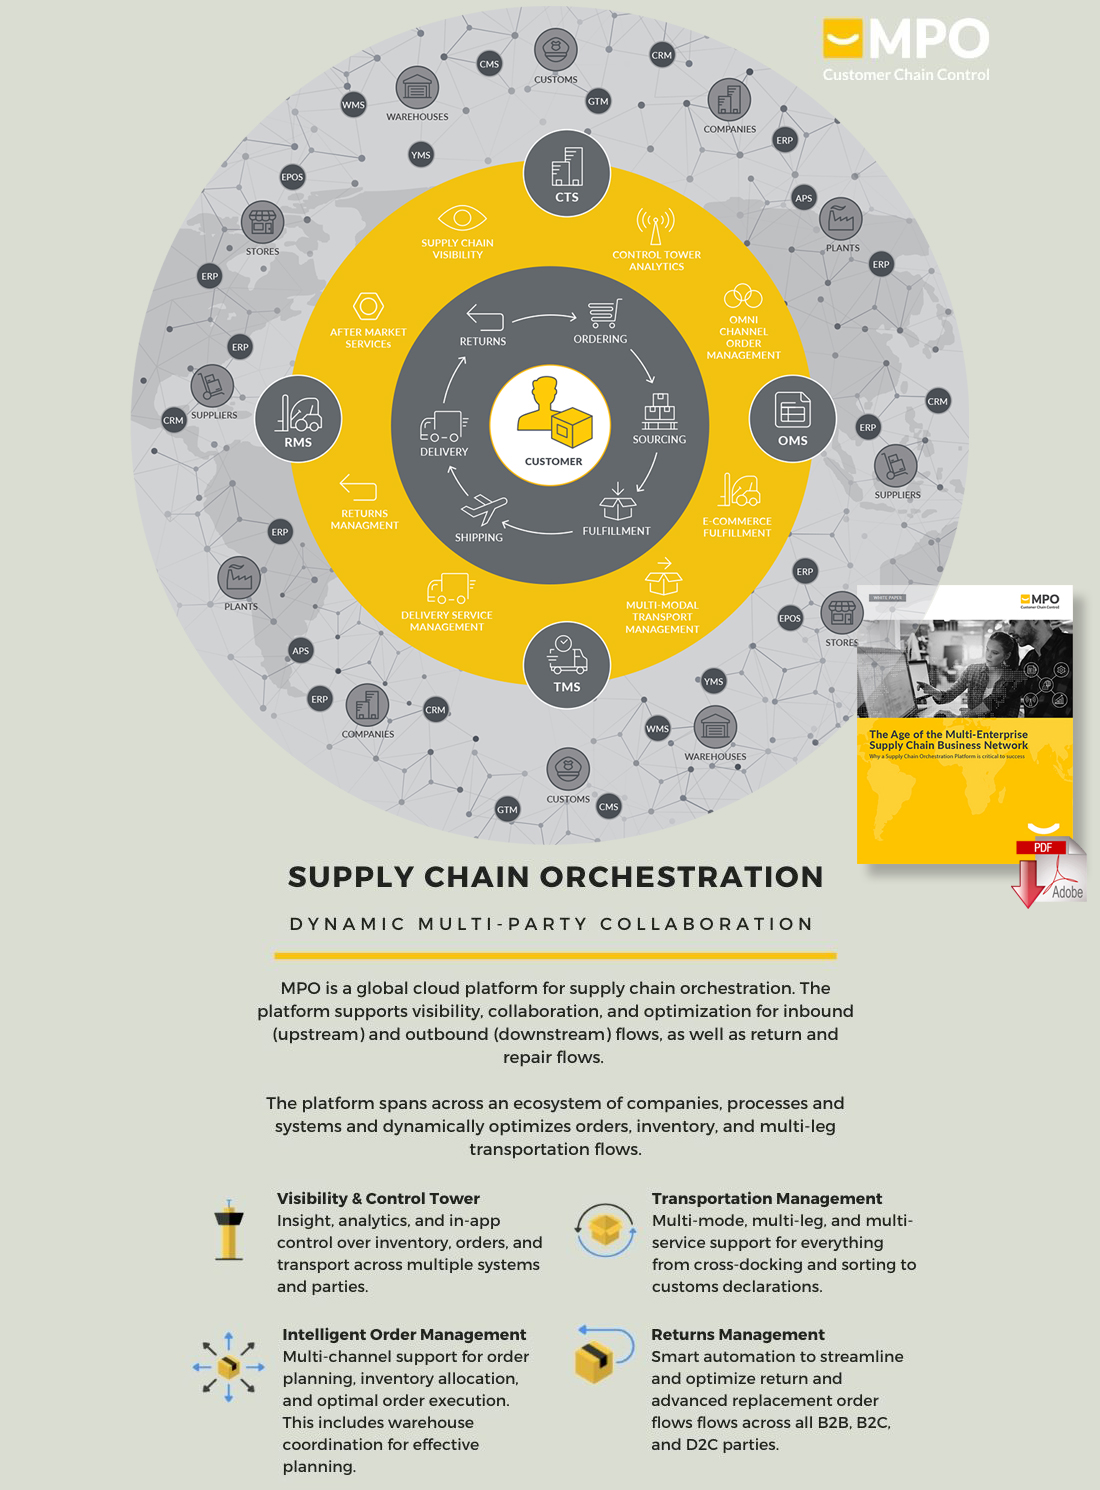 Download The Age of the Multi-Enterprise Supply Chain Business Network